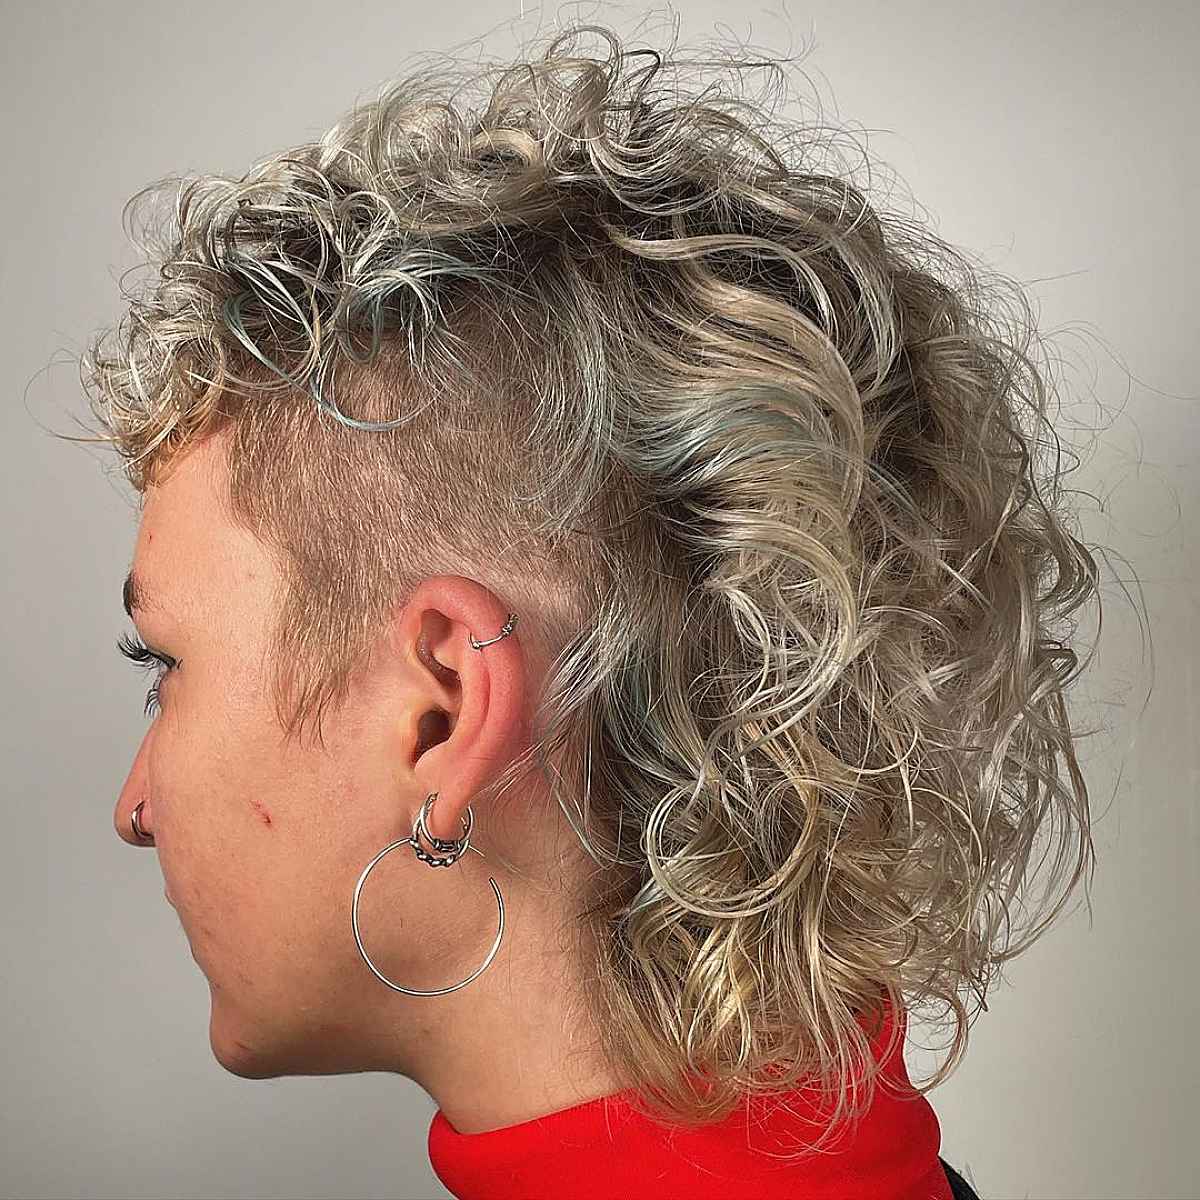 The Curly Blonde Mullet